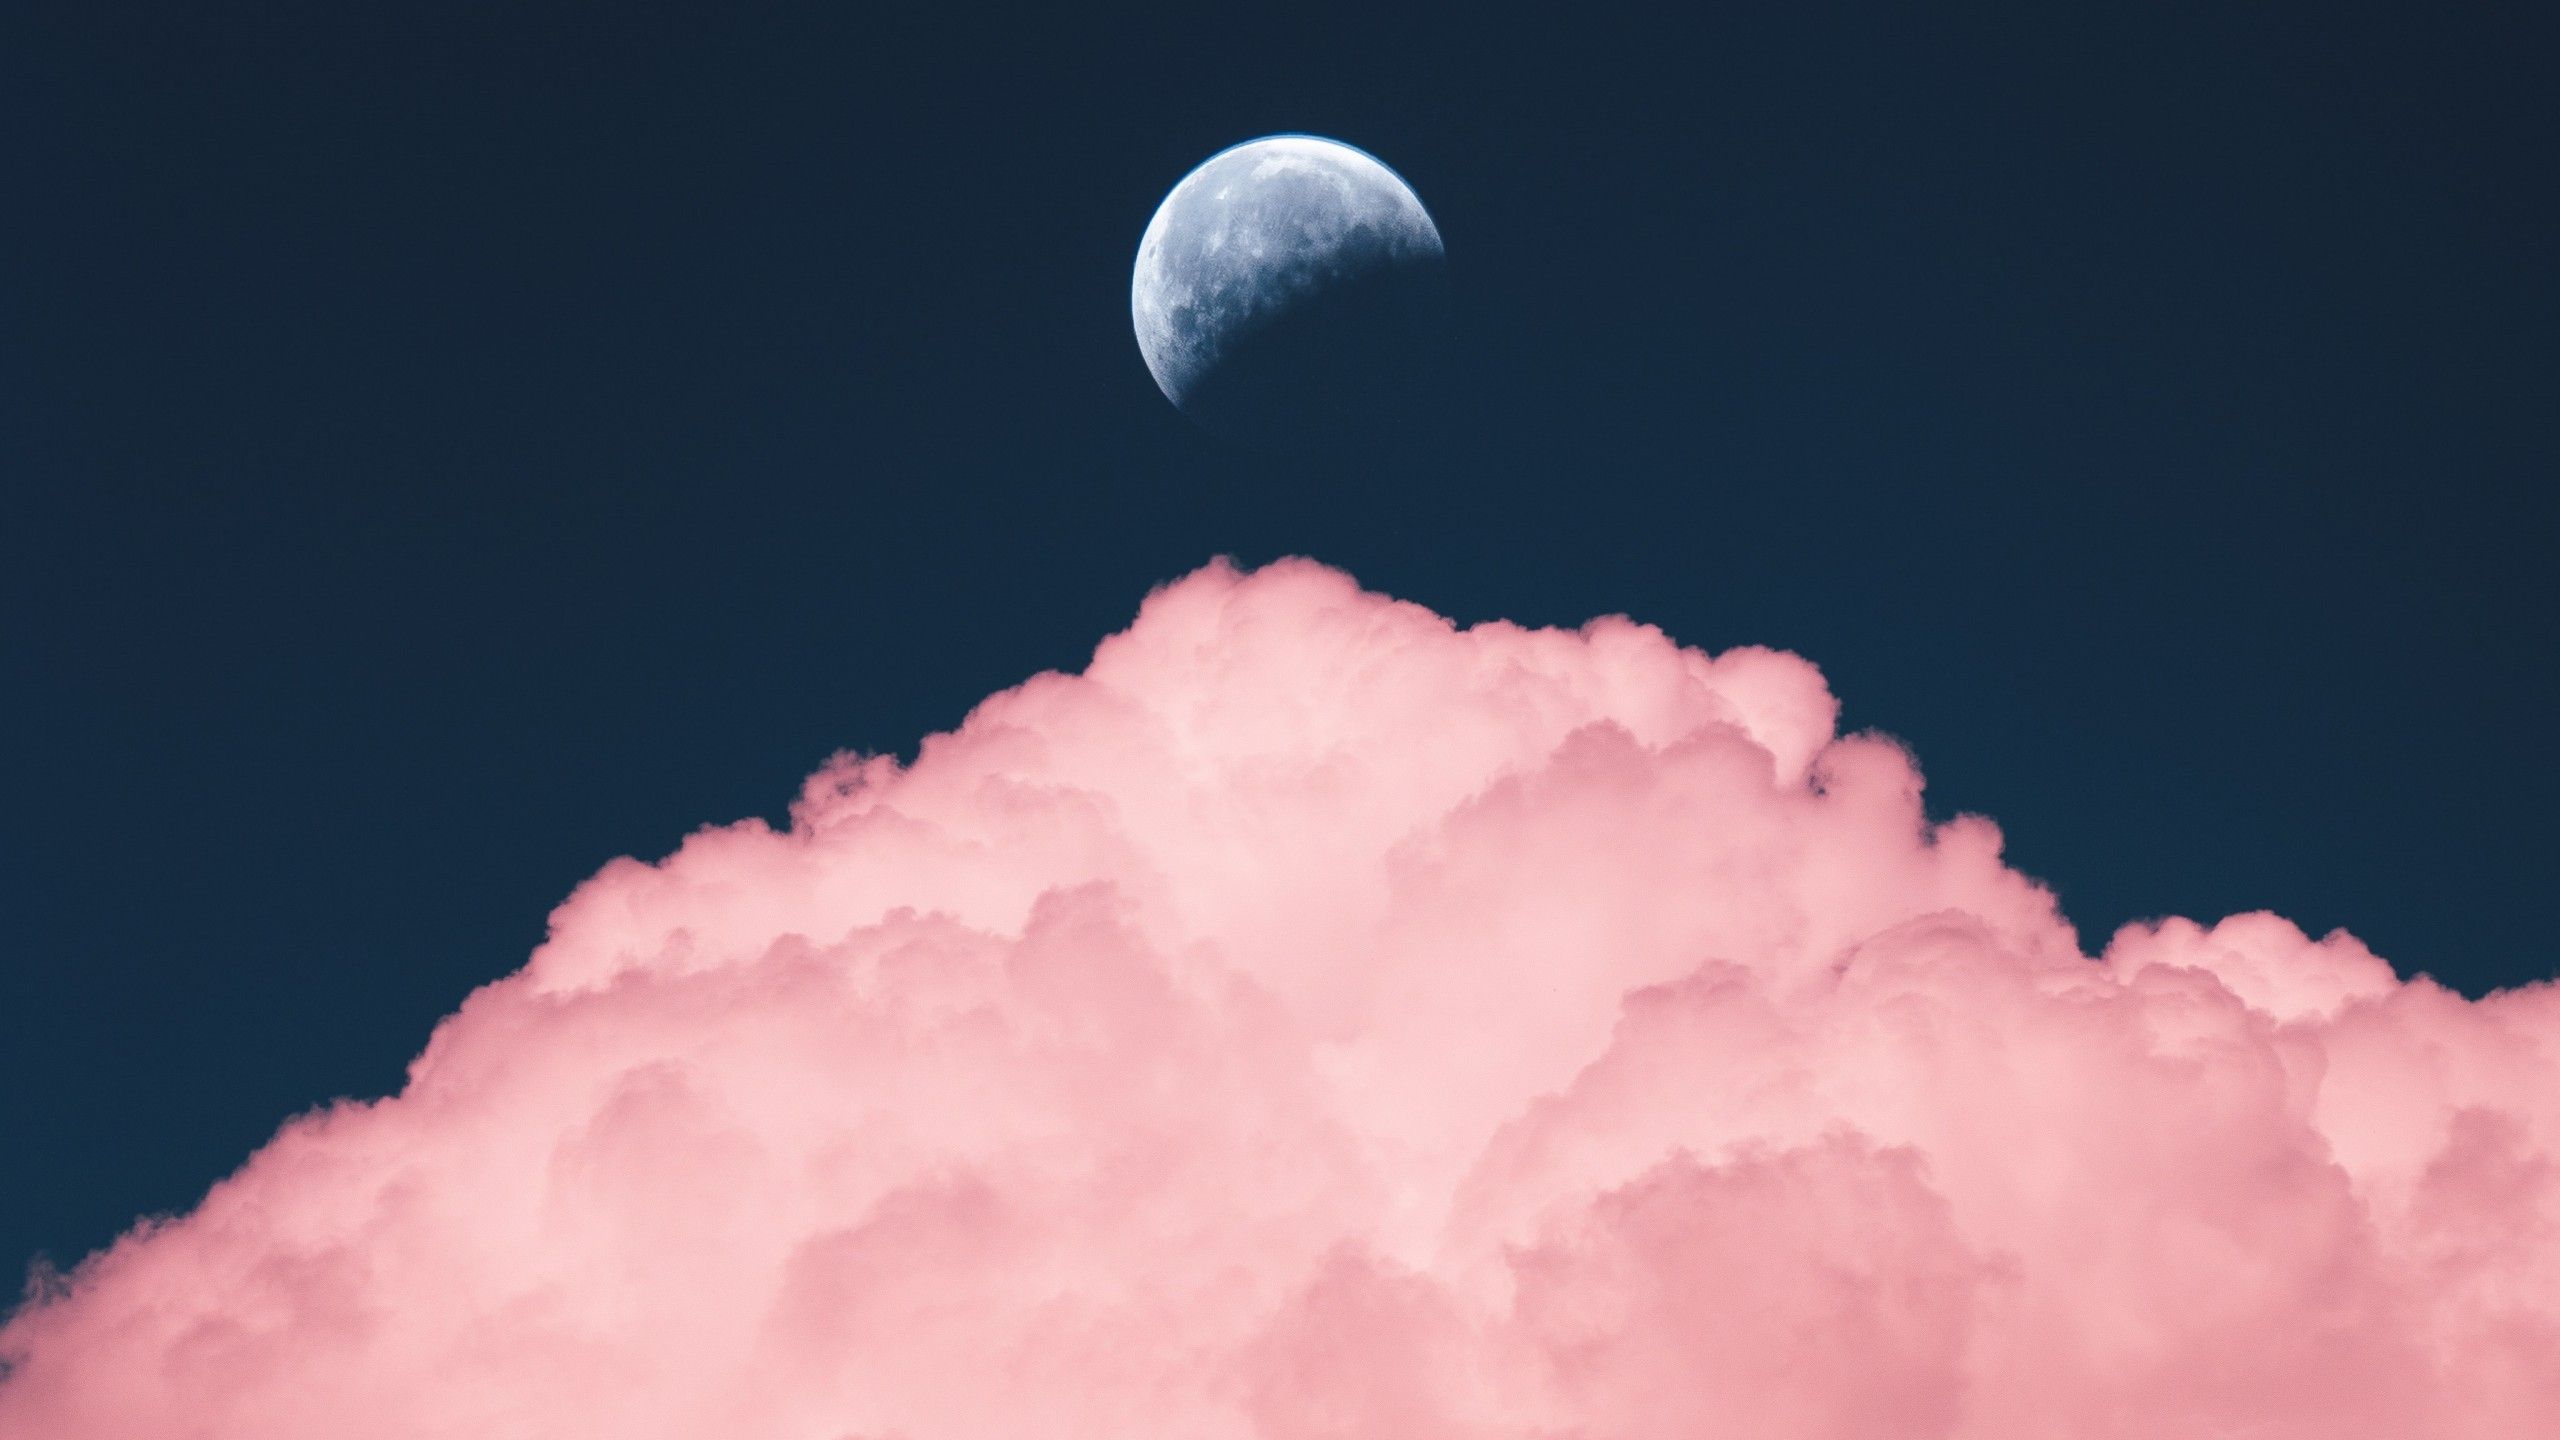 Pink Clouds Wallpapers on WallpaperDog